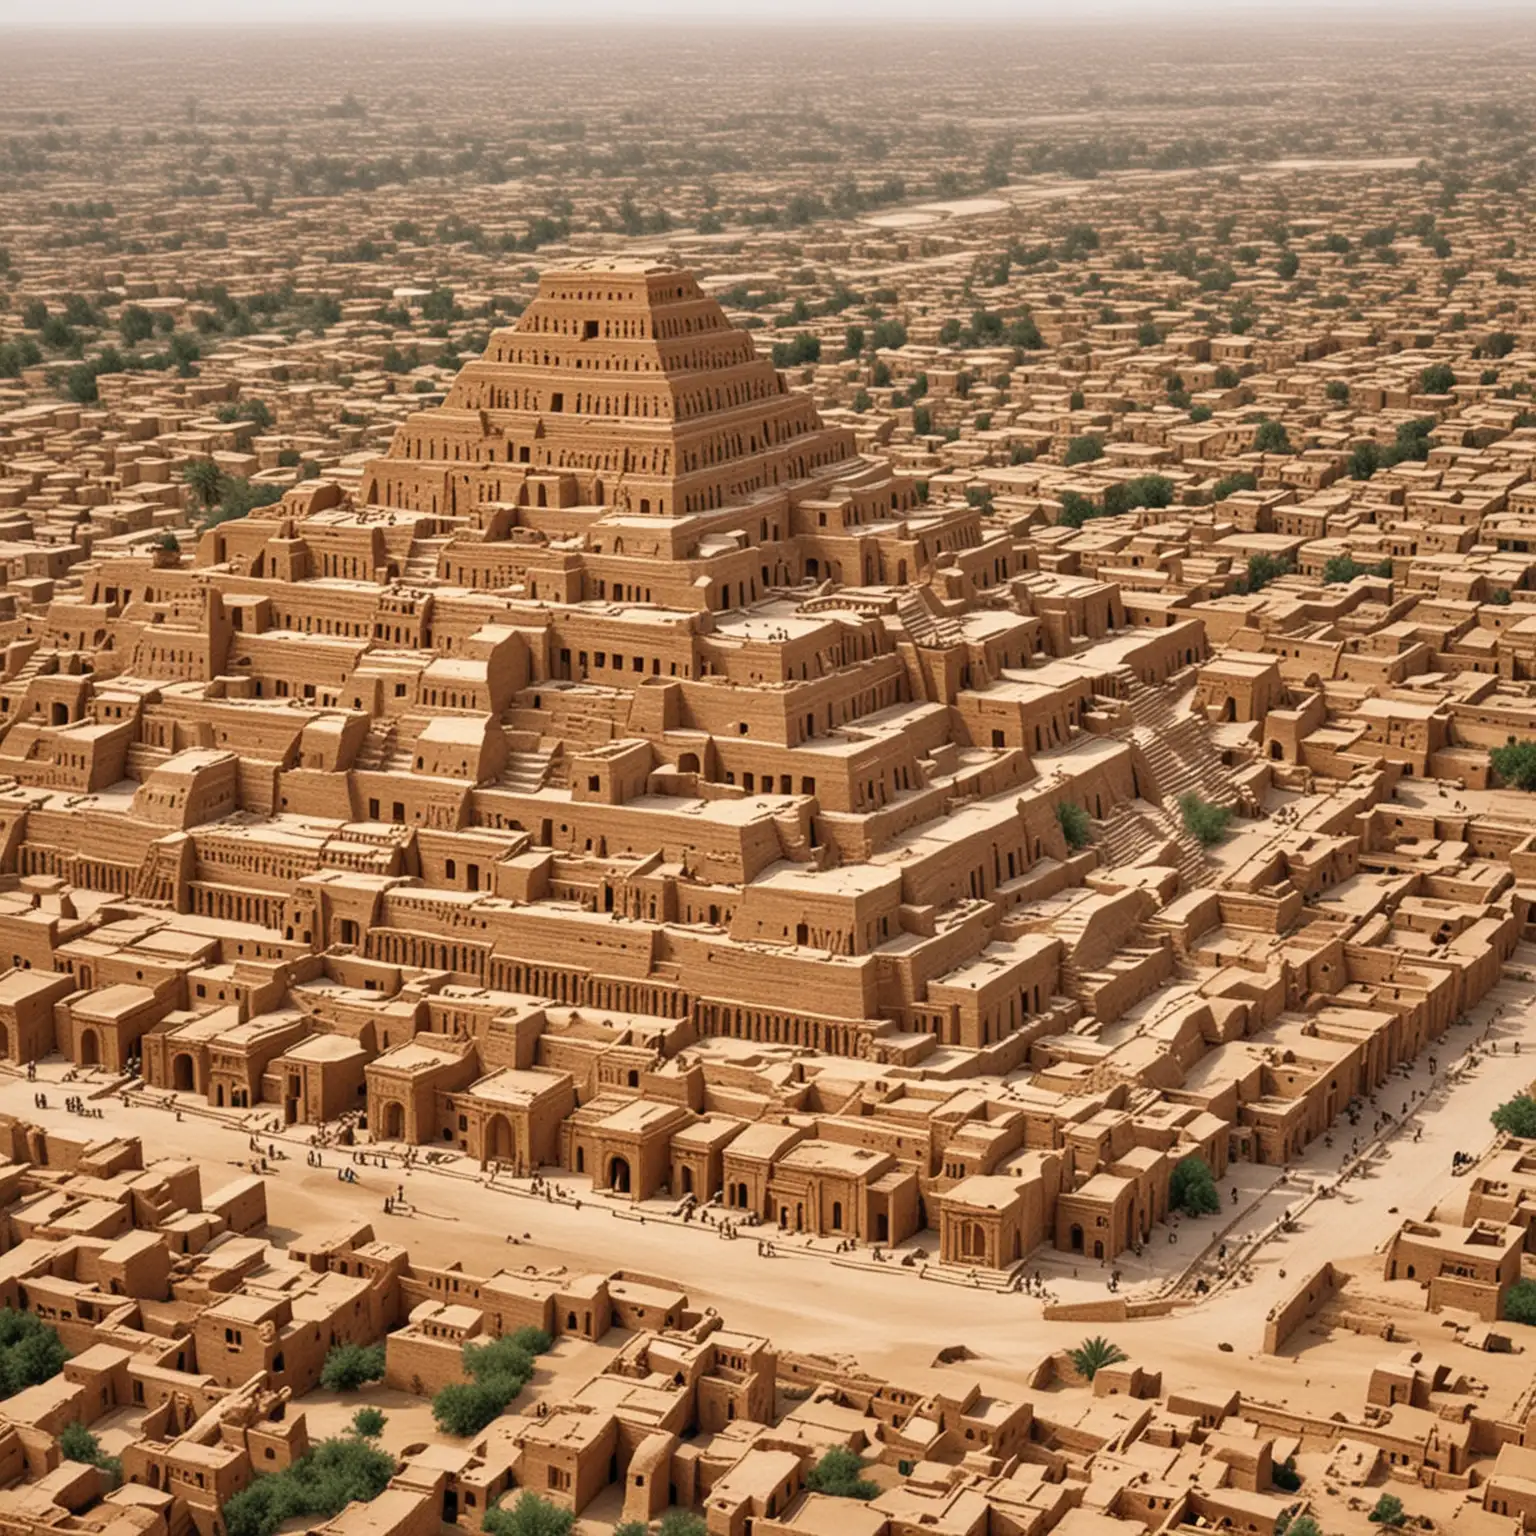 The ancient city of Baghdad from 500 BCE to 1CE. Depict the Mesopotamian influence of ziggurat during that time. incorporating terracotta construction and vaulted architecture and timber. Deriving the material of use brick and tile allocation Masonry Techniques.